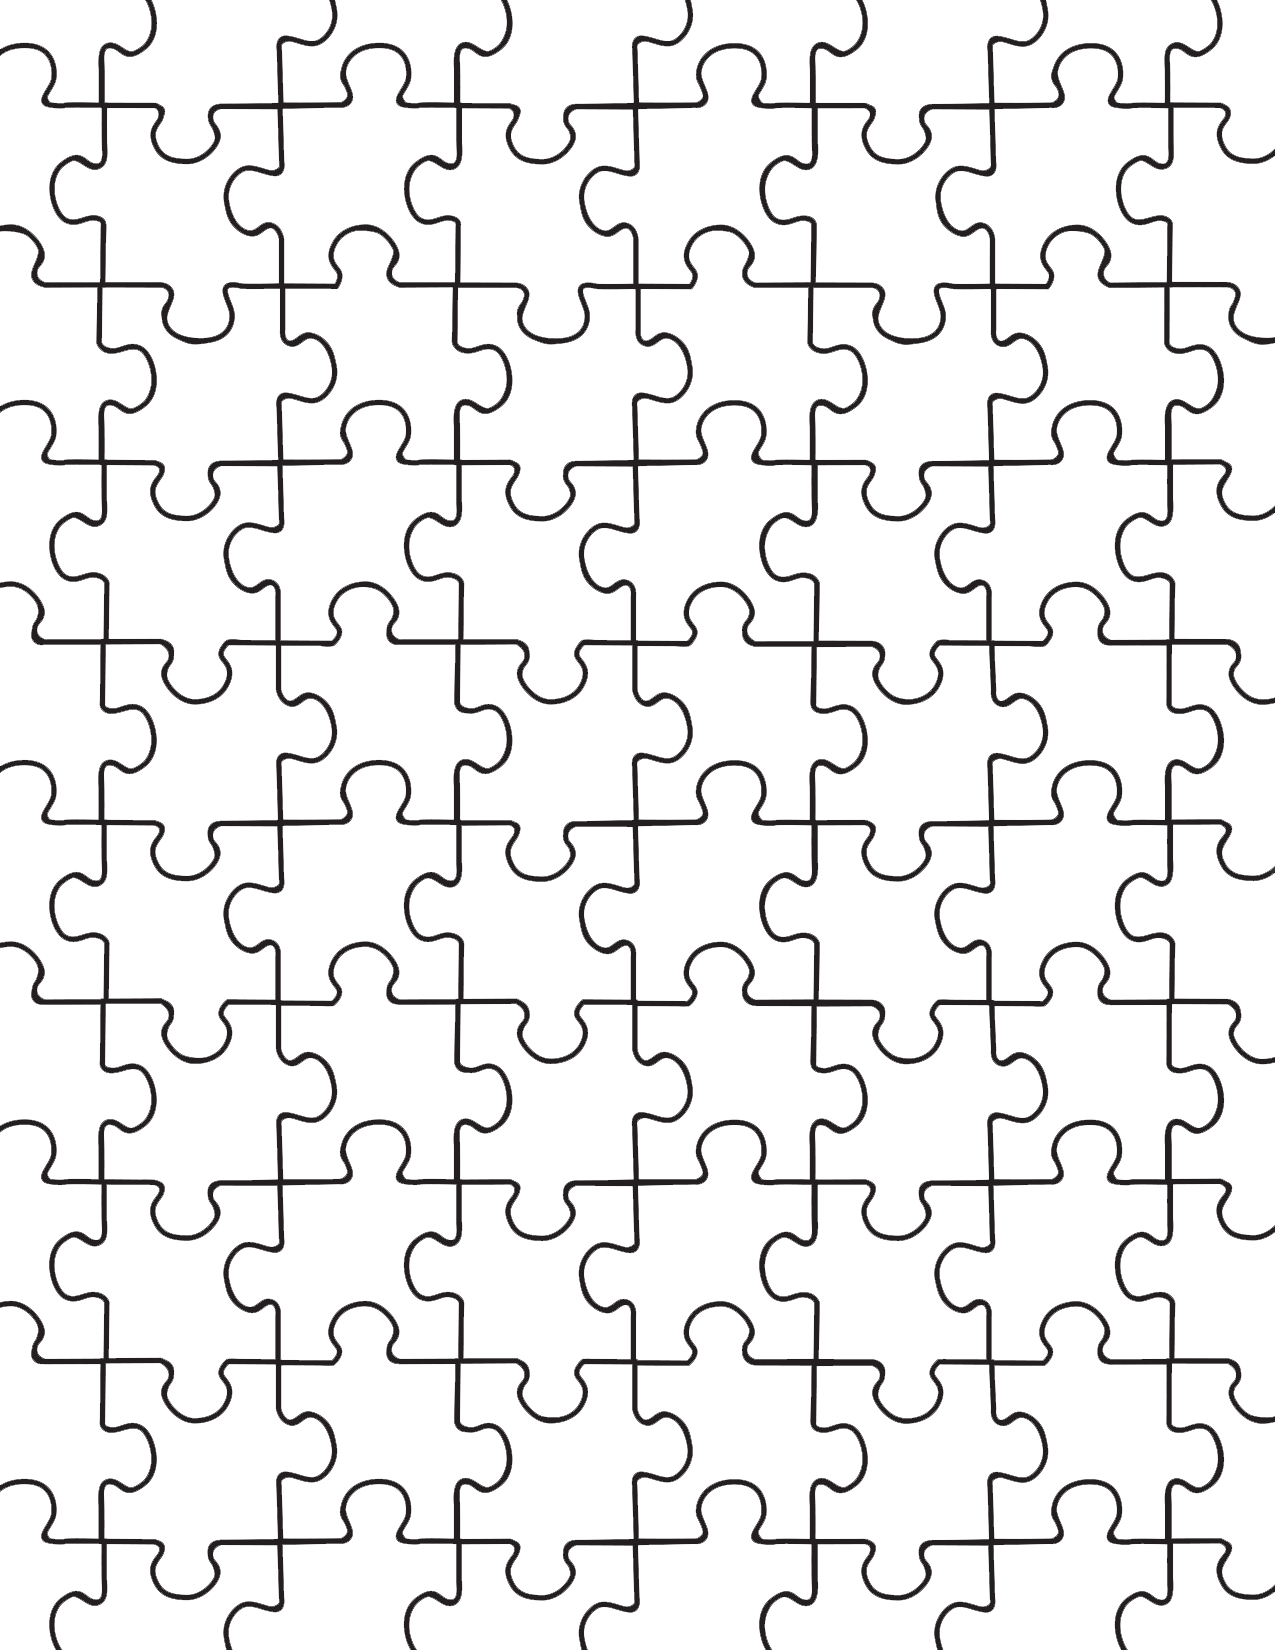 Jigsaw Puzzle PNG Image 